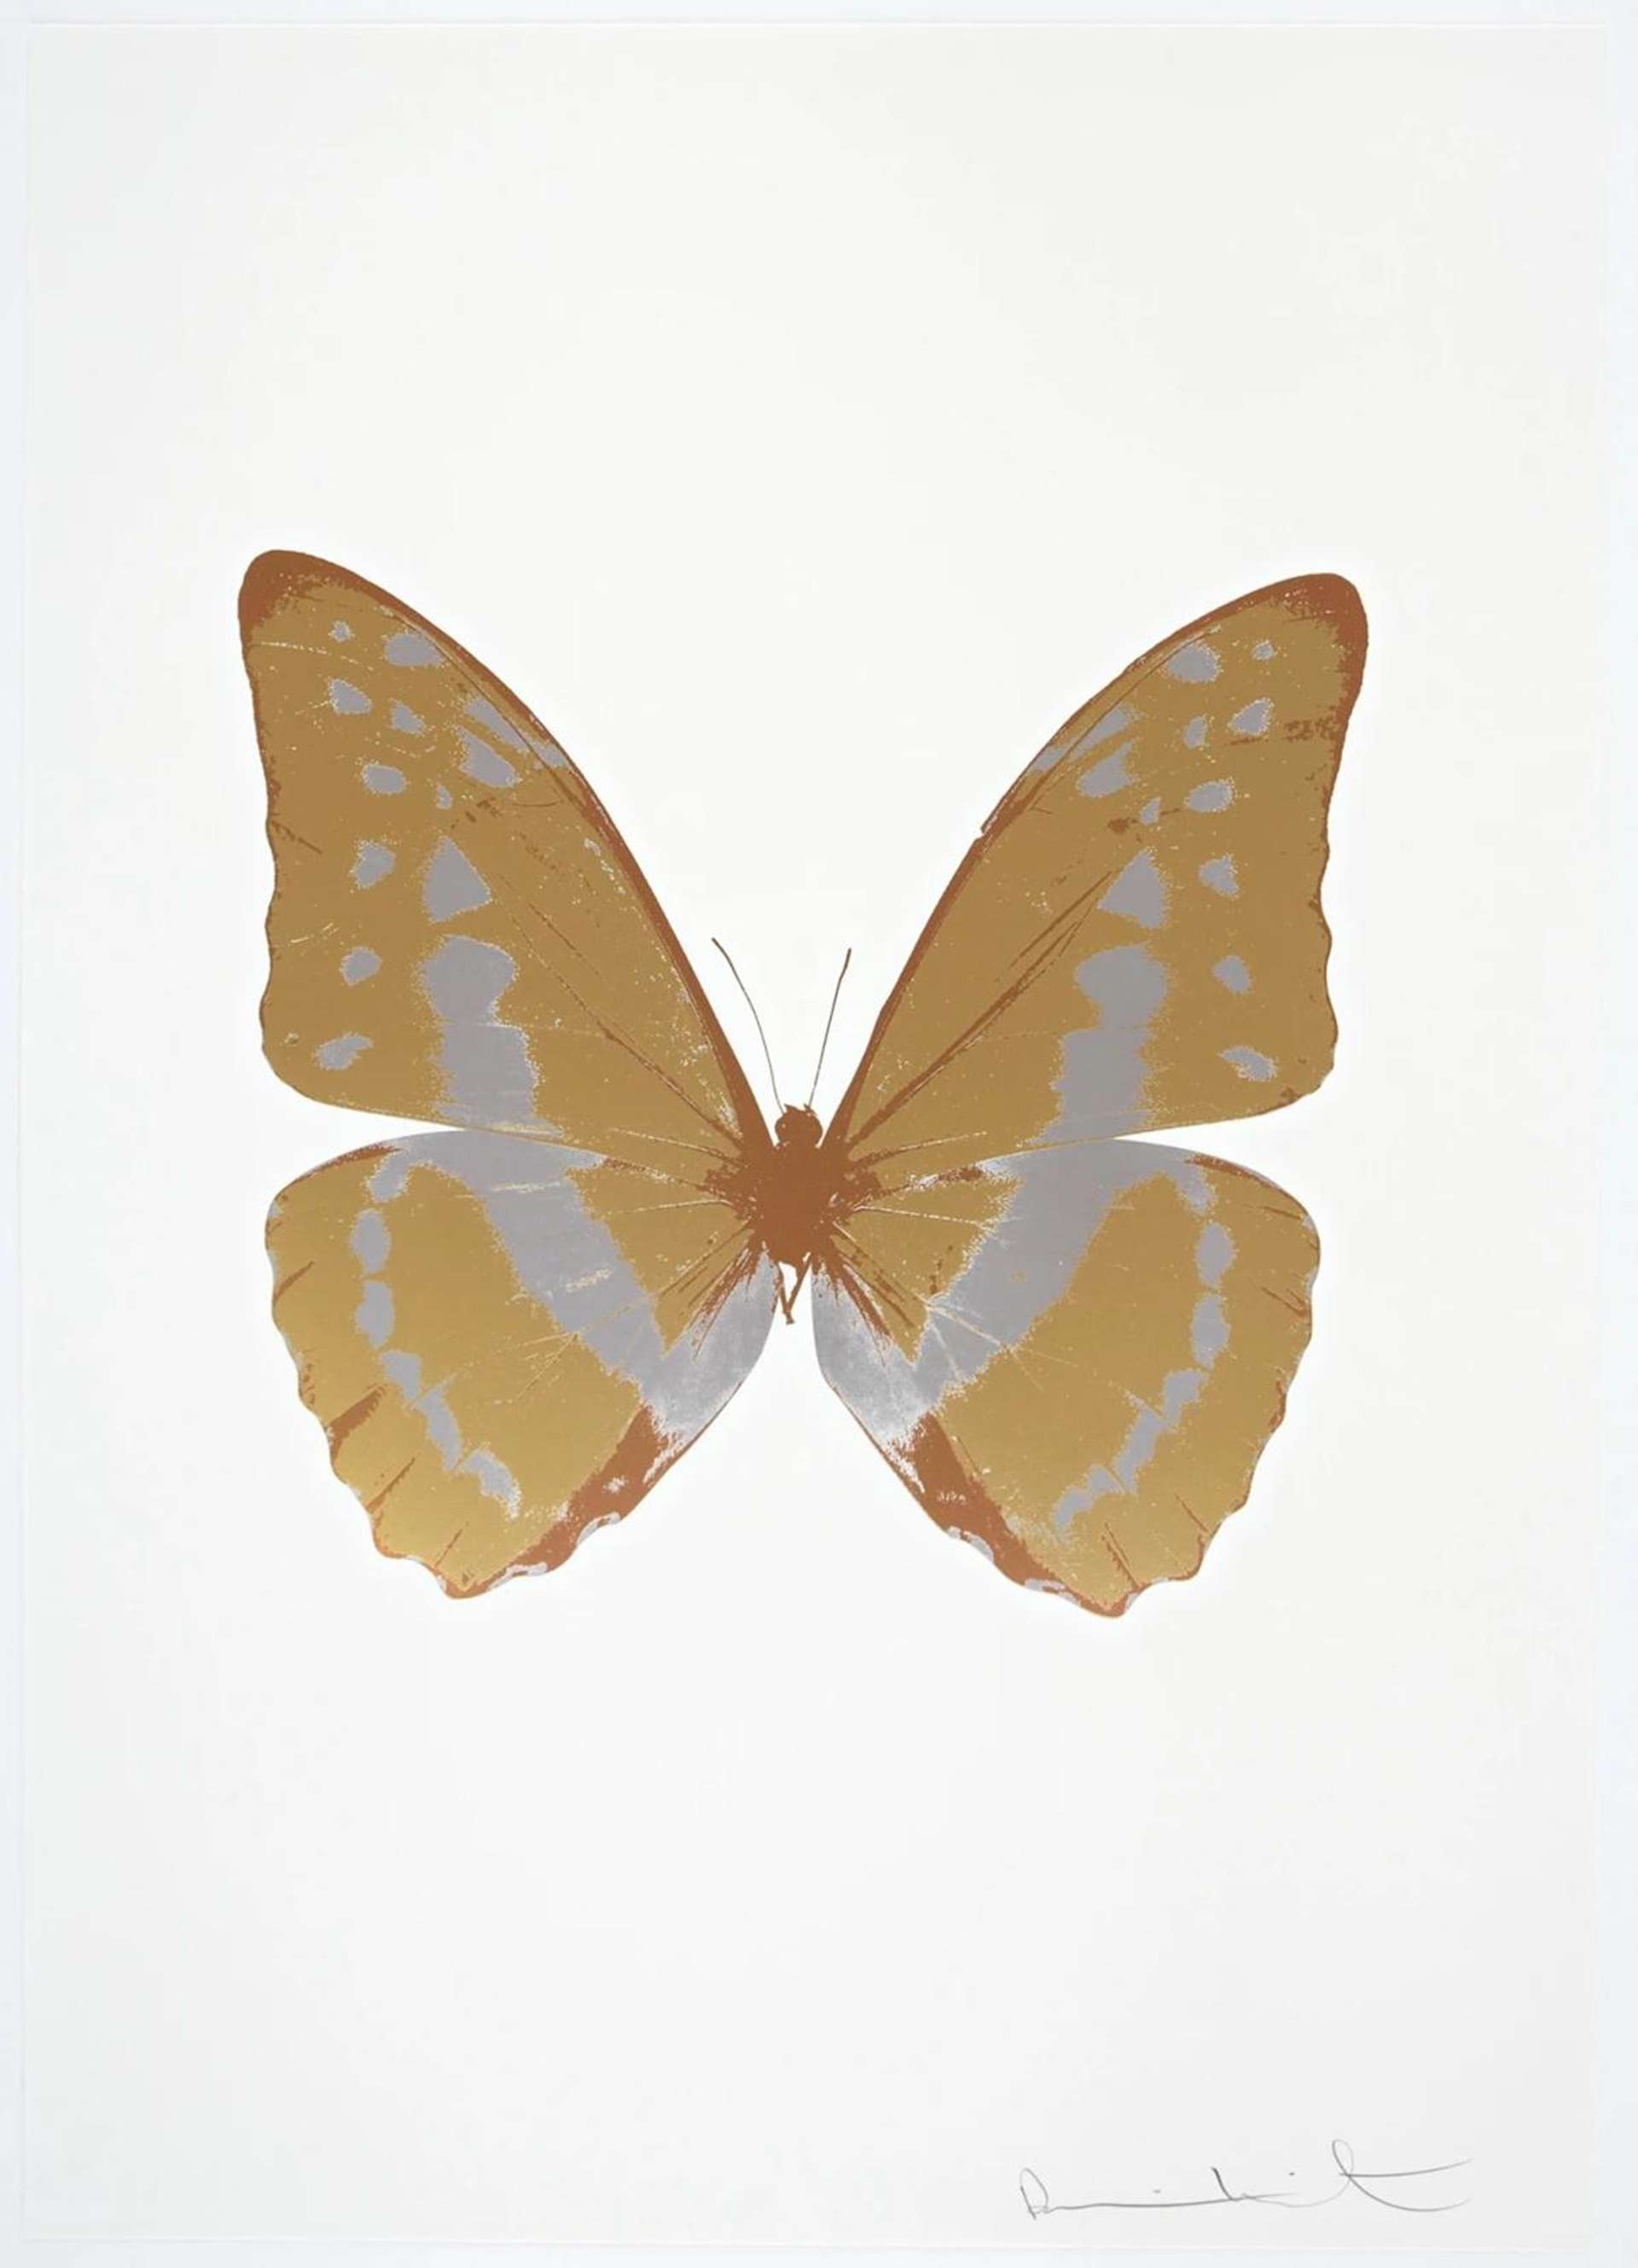 Damien Hirst: The Souls III (hazy gold, silver gloss, rustic copper) - Signed Print